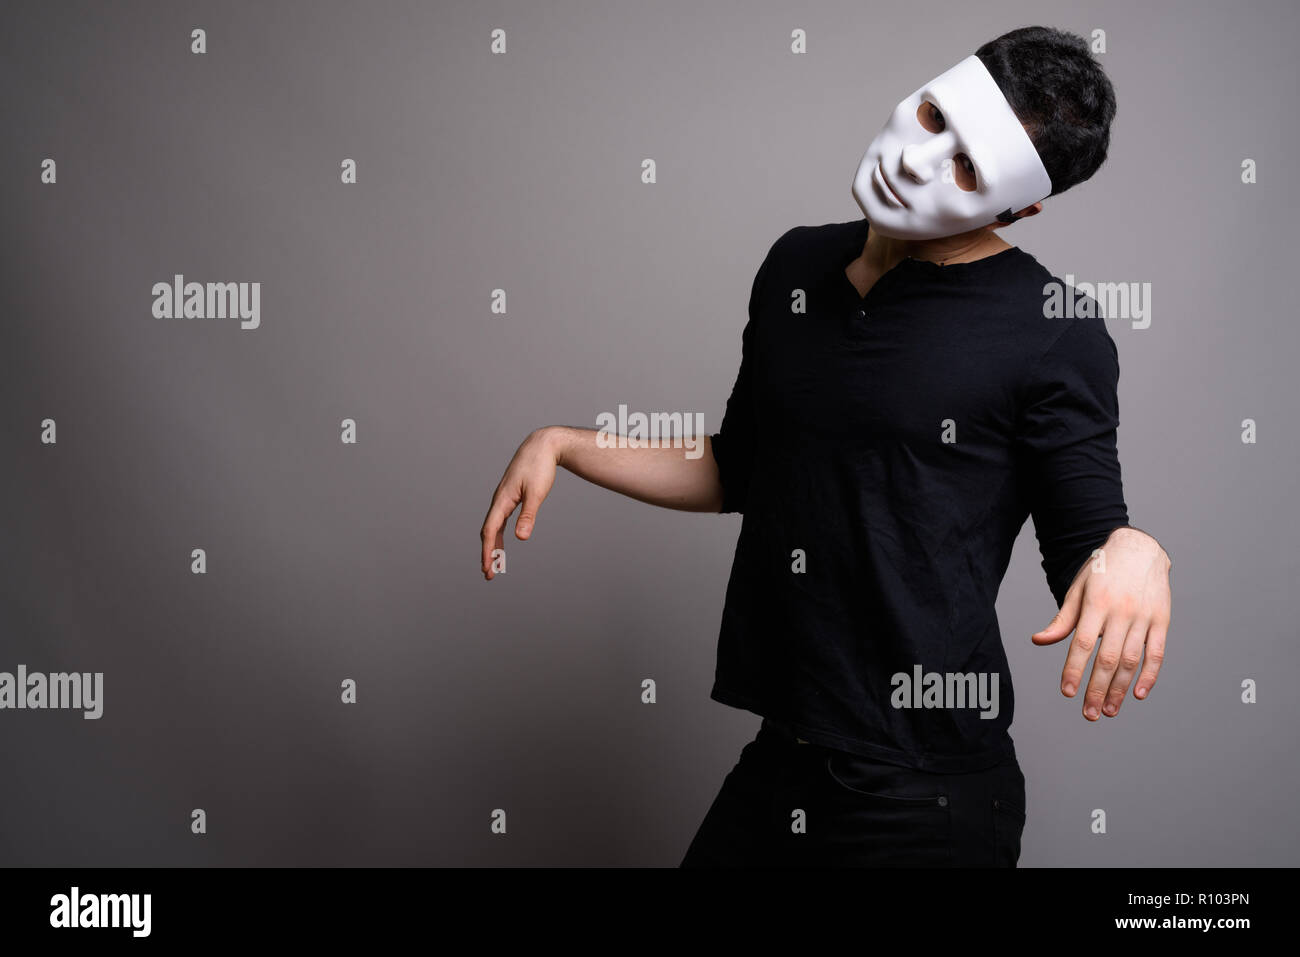 Portrait of young handsome man against gray background Stock Photo